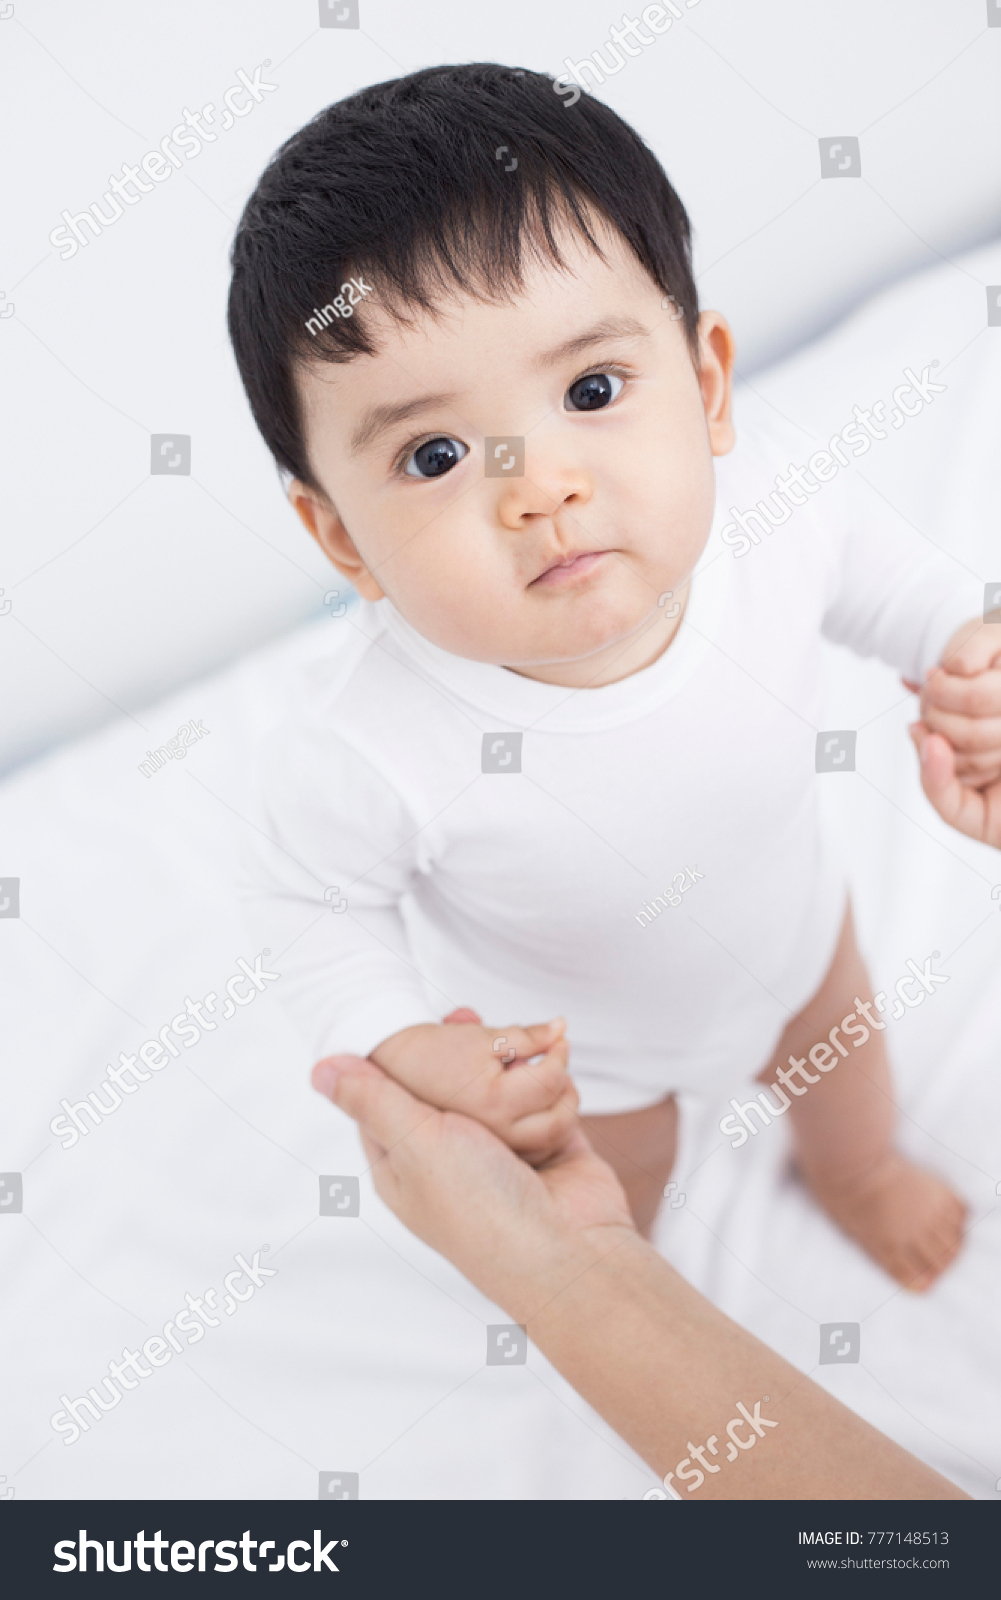 15 HQ Pictures Baby Boy With Black Hair : The Cutest Baby Photo Captured In Jana Photography Vancouver